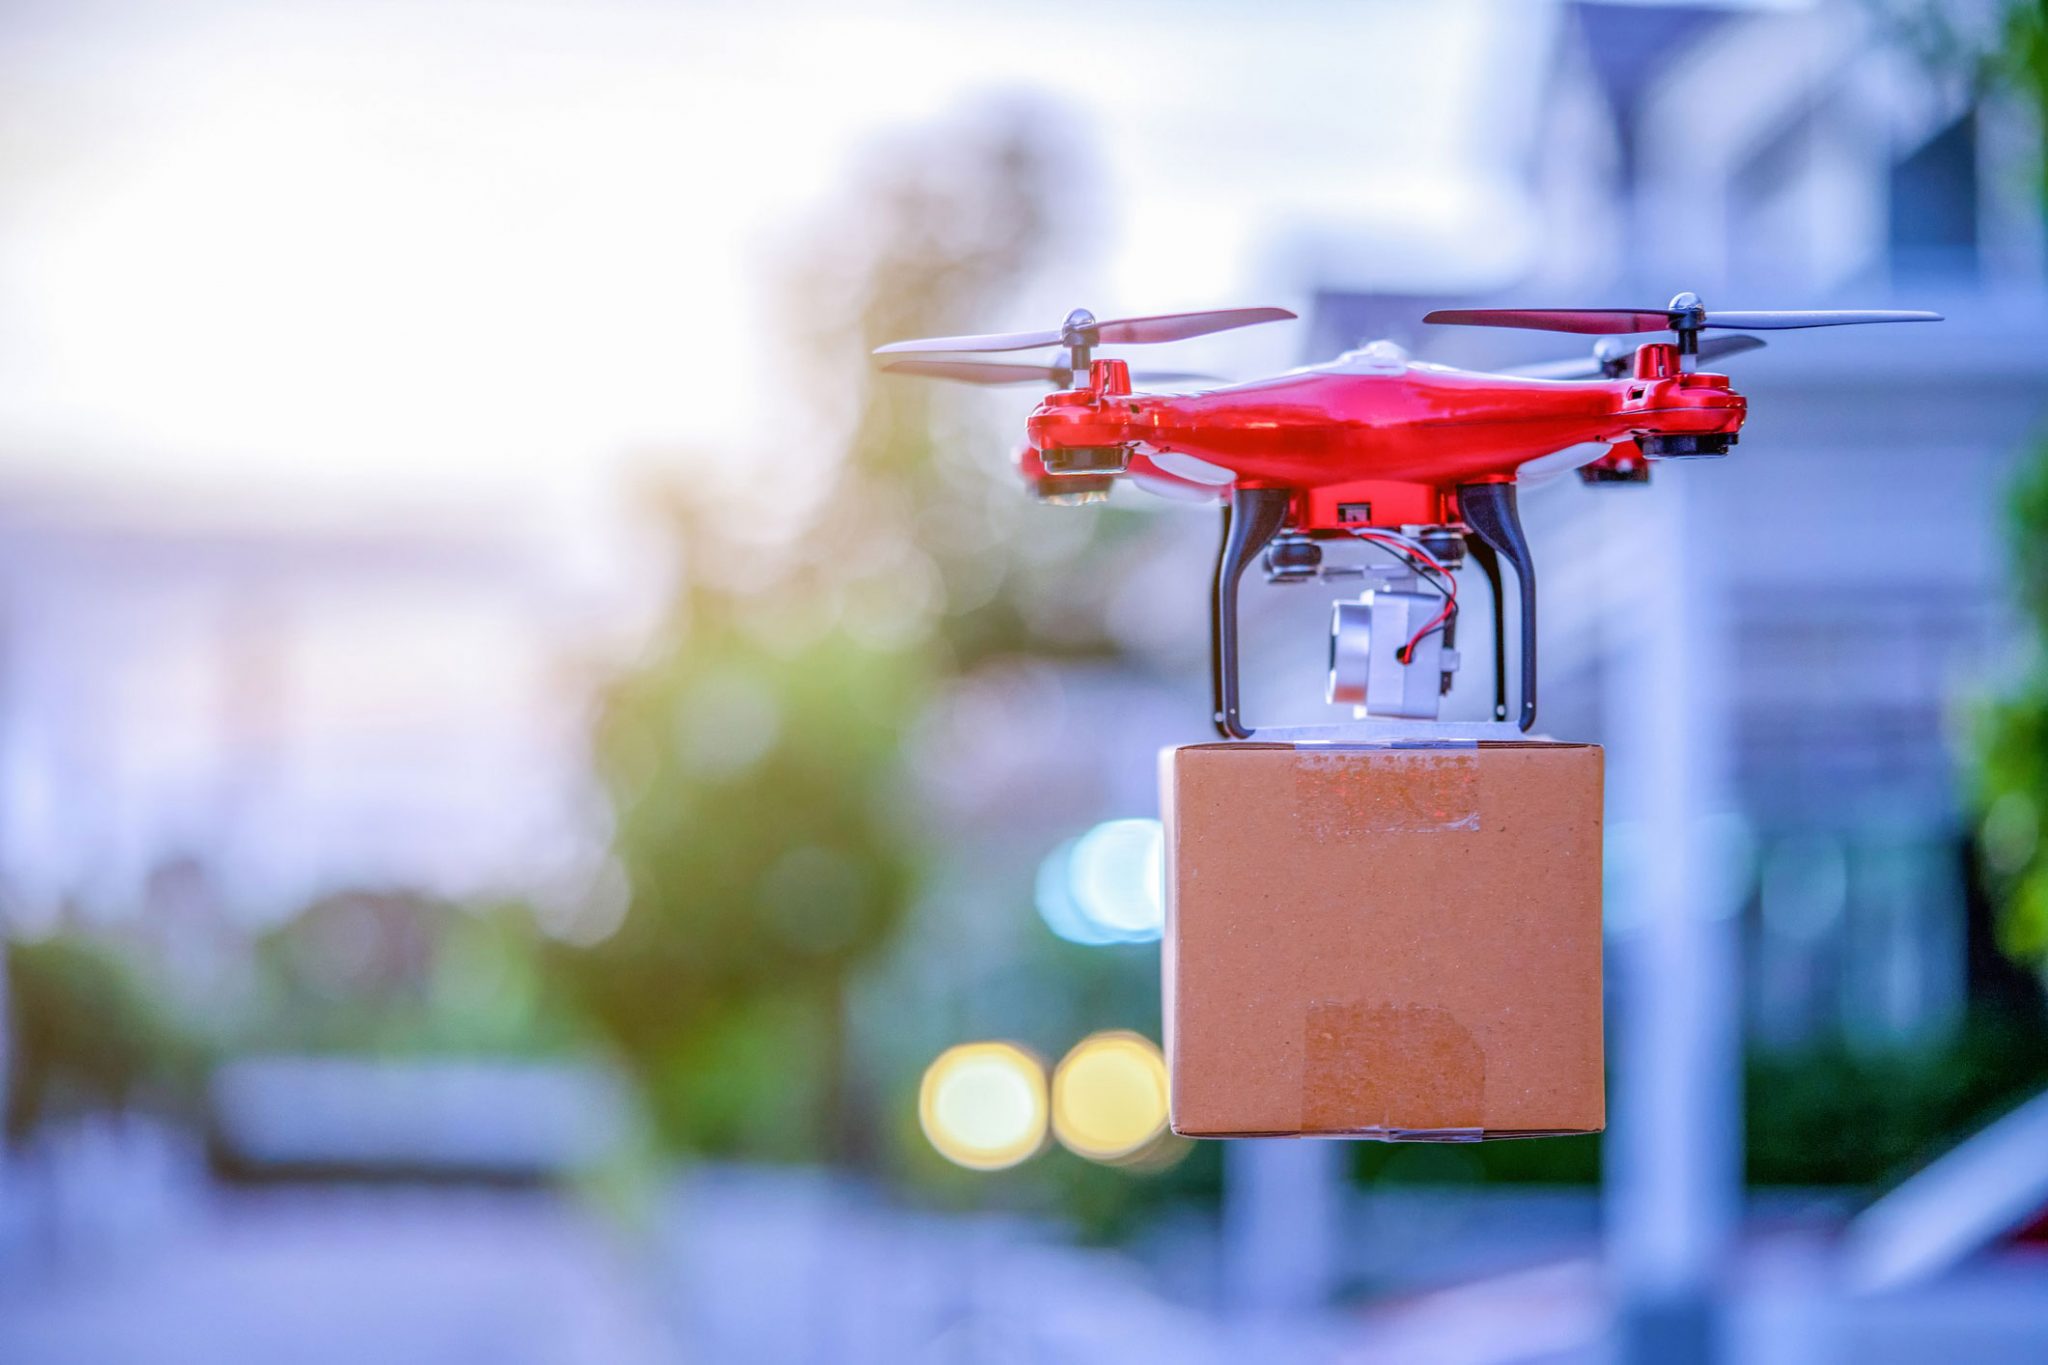 Privatising the sky: drone delivery promises comfort and speed, but at a cost to workers and communities